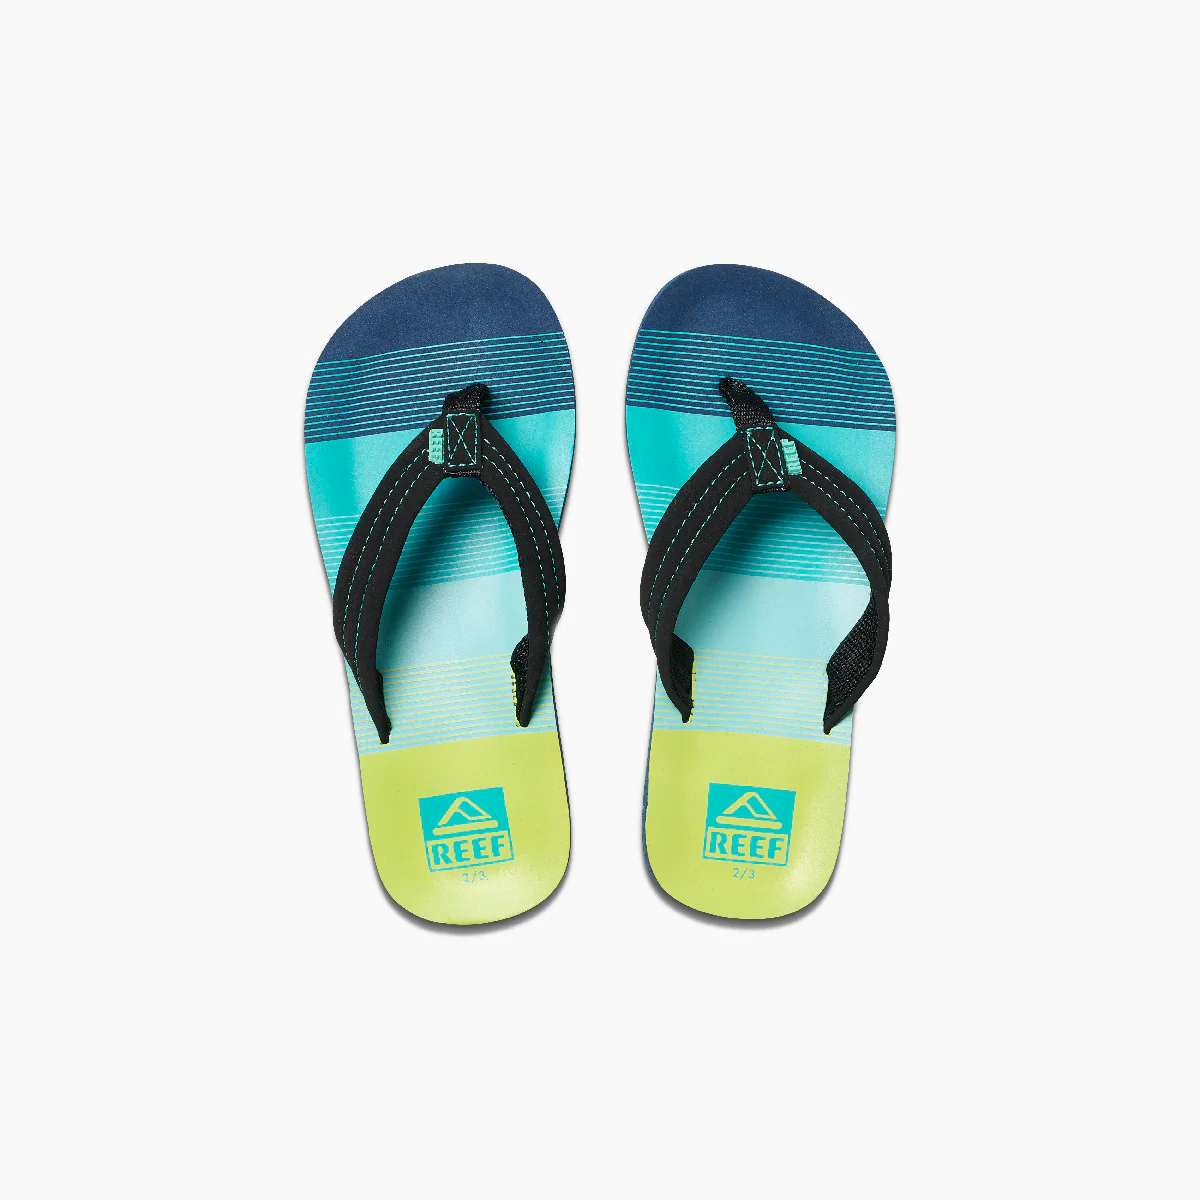 colorful flip flops (blue, teal, yellow) top down view